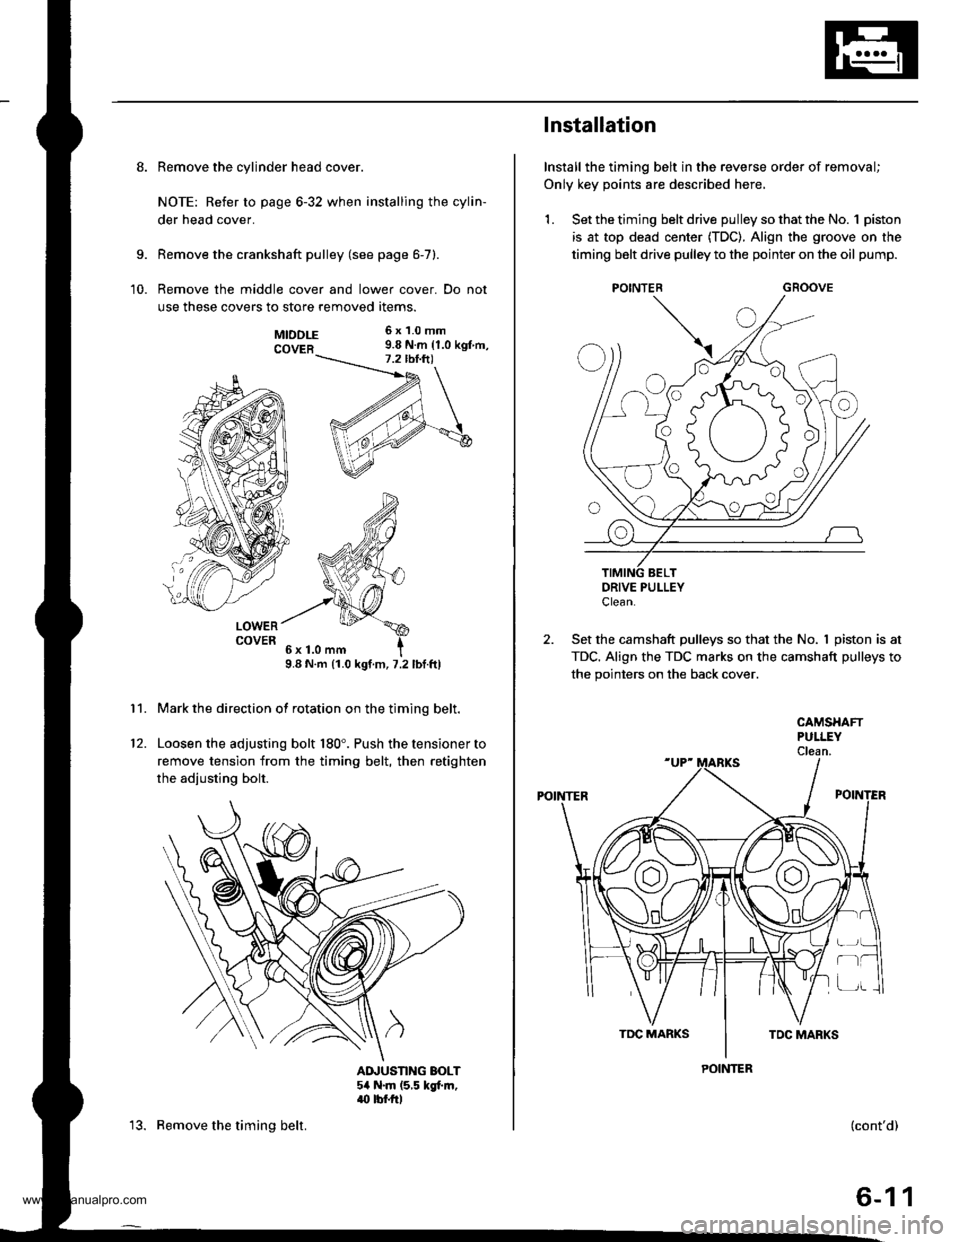 HONDA CR-V 2000 RD1-RD3 / 1.G Workshop Manual 
8. Remove the cylinder head cover.
NOTE: Refer to page 6-32 when installing the cylin-
der head cover.
Remove the crankshaft pulley (see page 6-7).
Remove the middle cover and lower cover. Do not
use